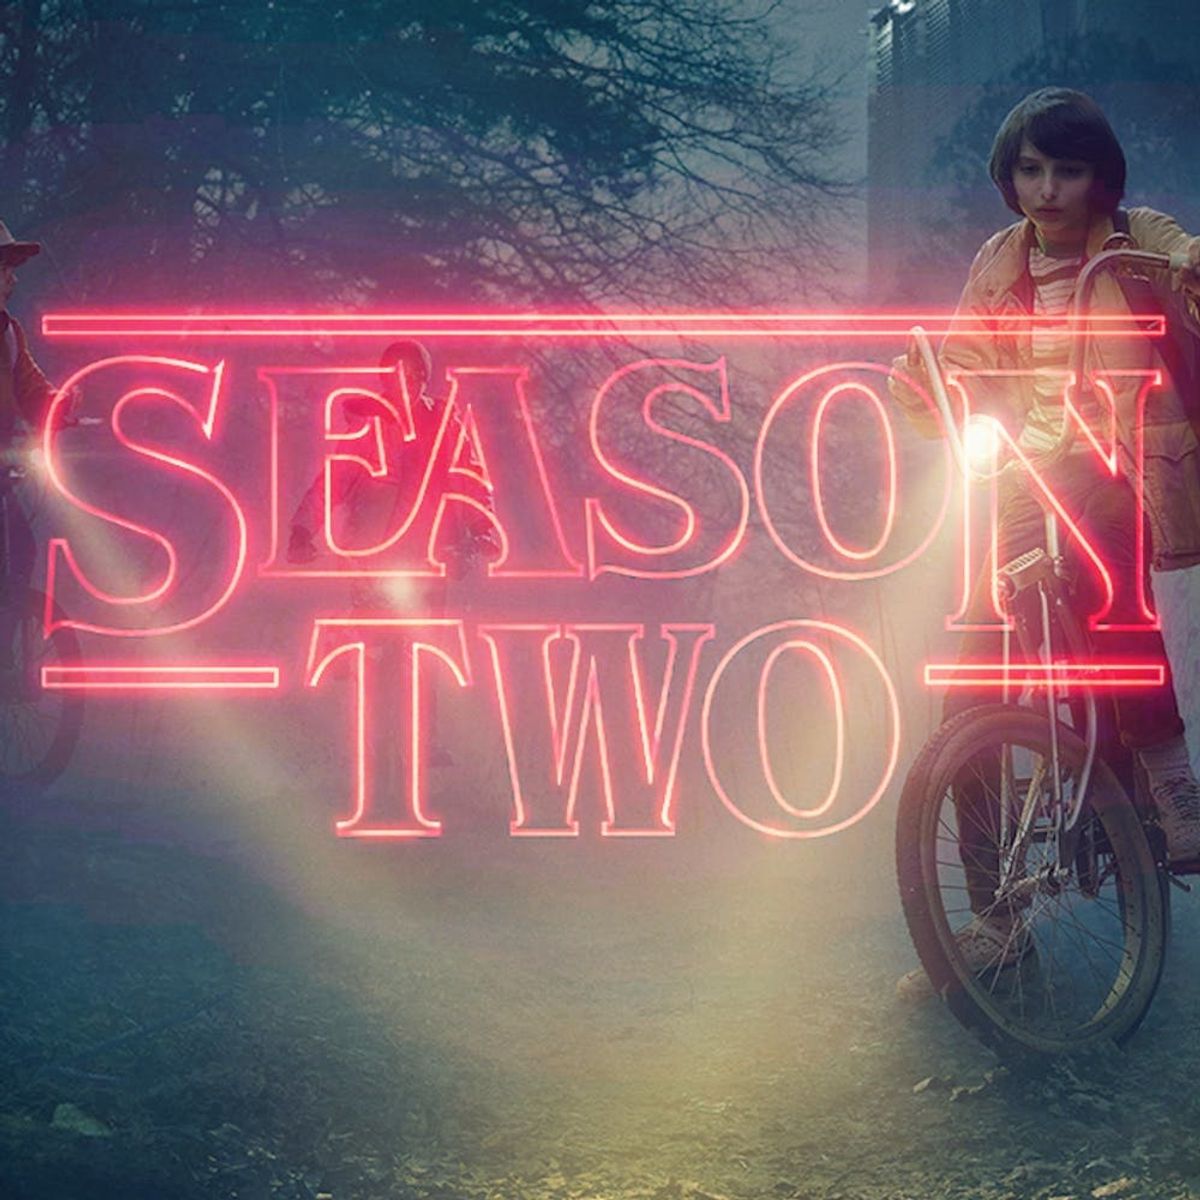 The Stranger Things EW Cover Just Gave Us a Vital Clue About Season Two